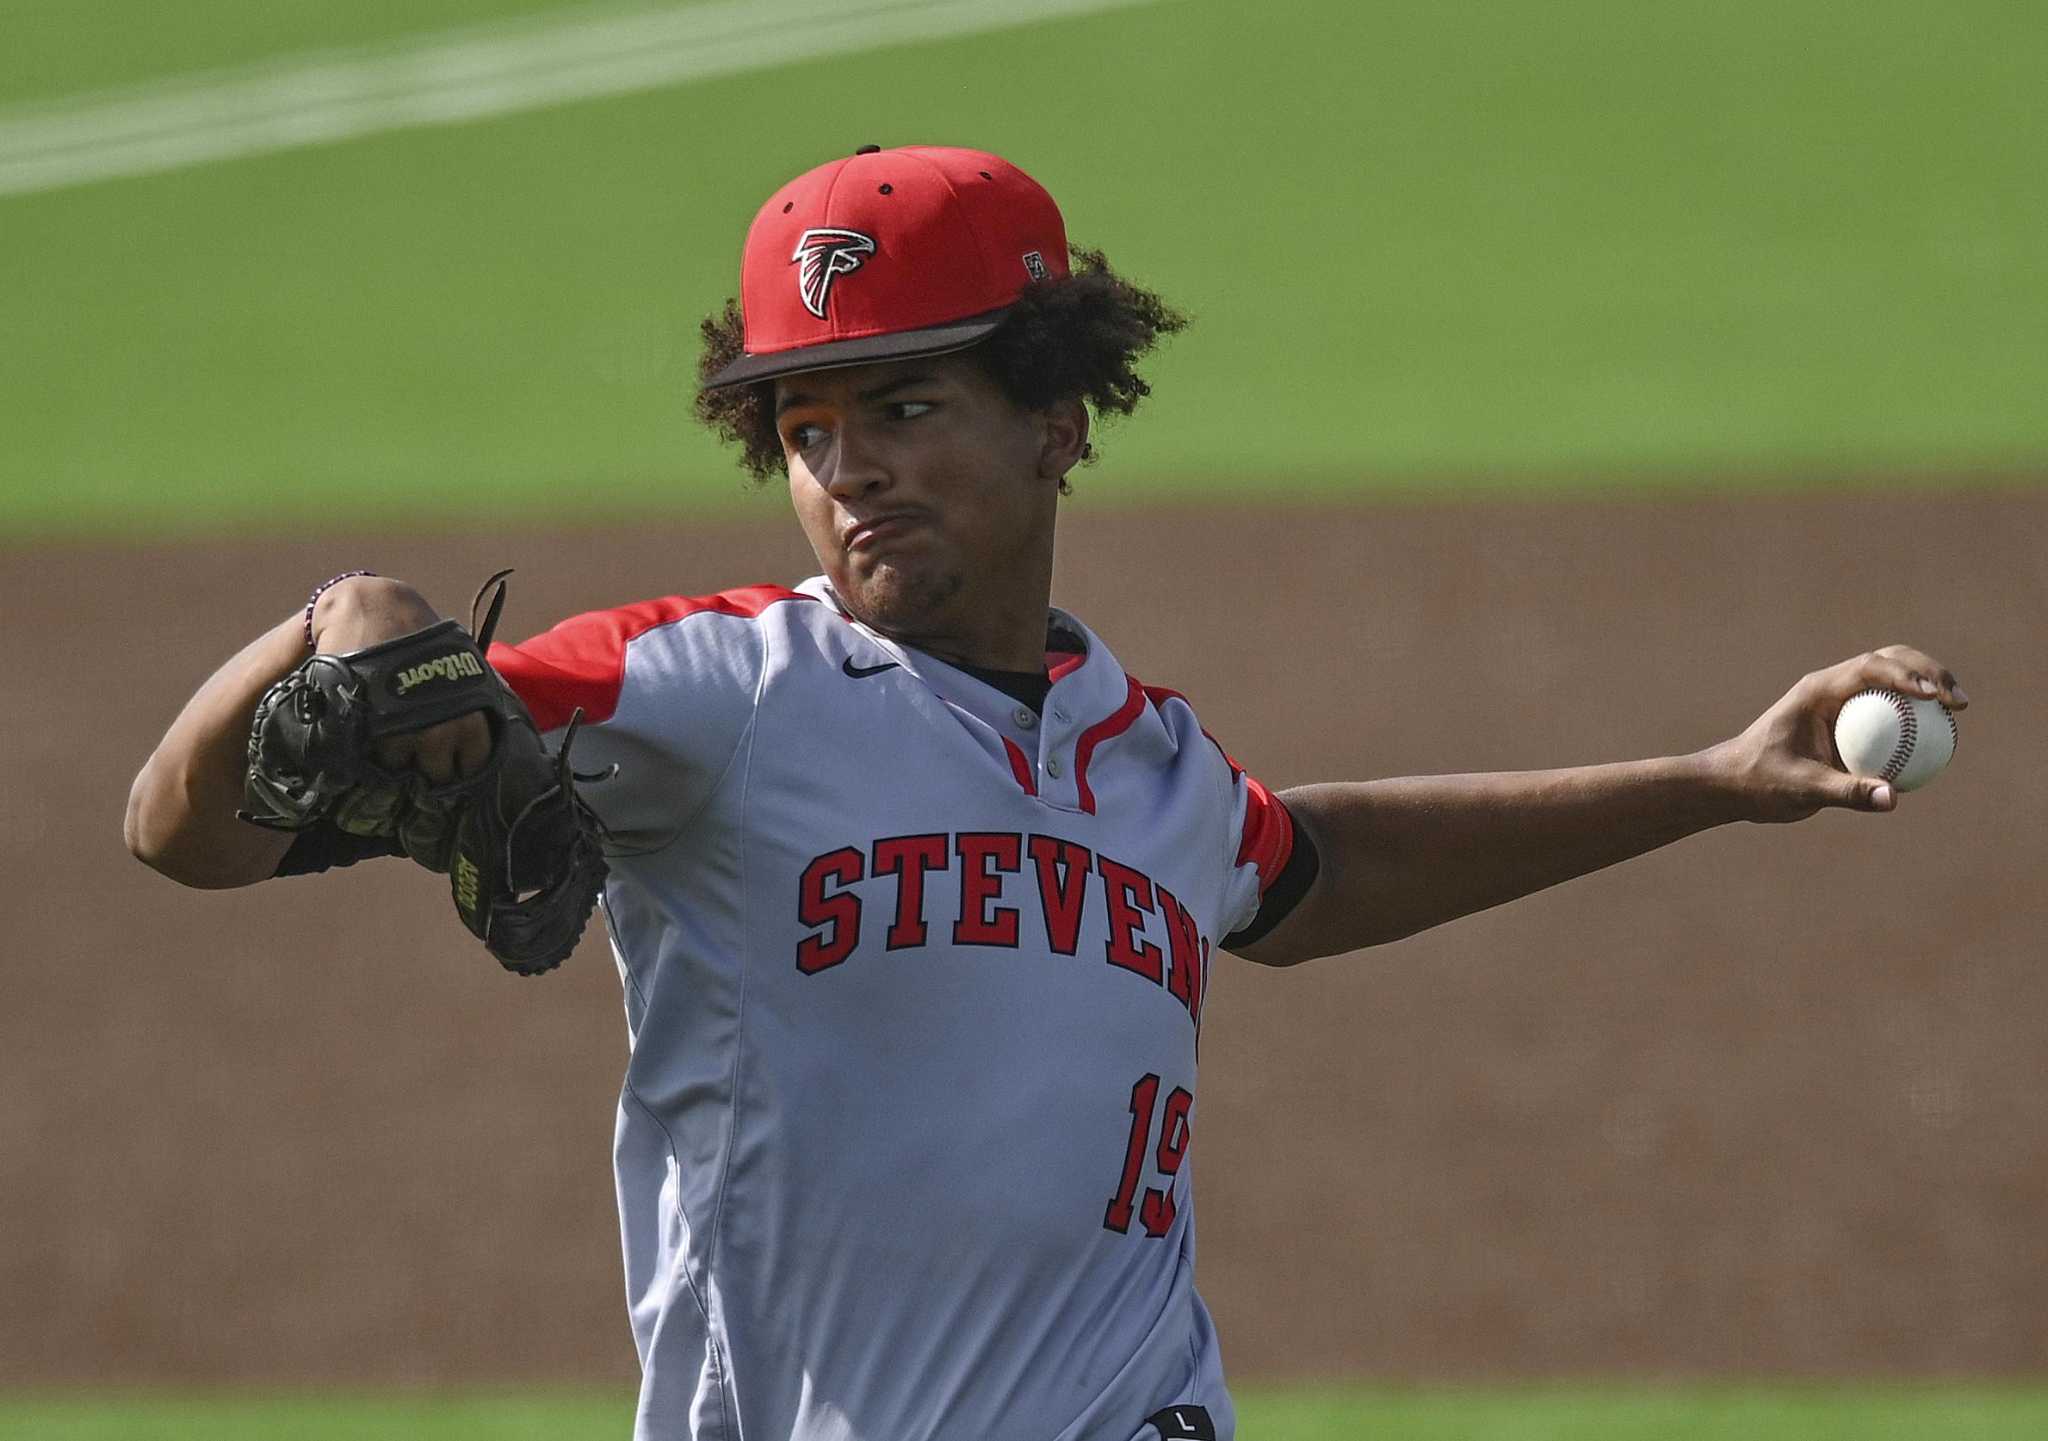 2023 baseball preview: Players to watch, class outlooks